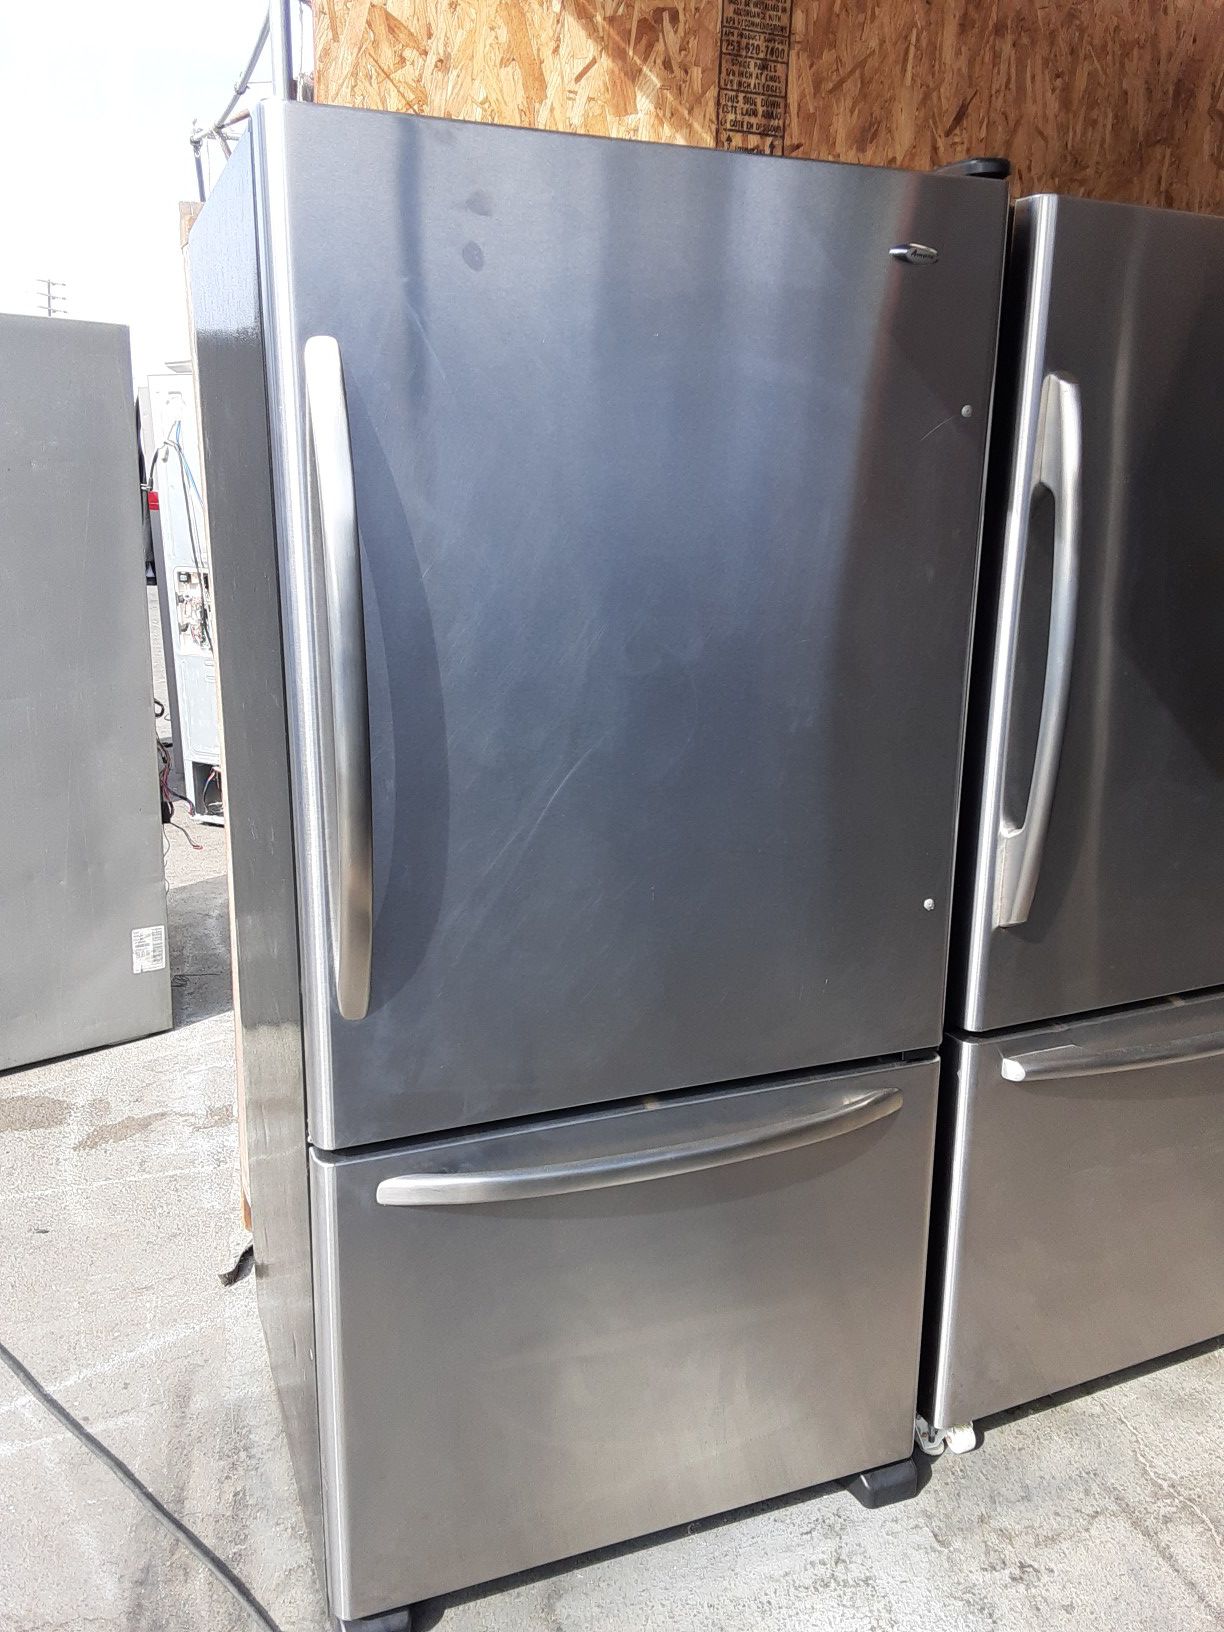 $399 Whirlpool Amana stainless bottom freezer fridge measures 33 wide includes delivery in the San Fernando Valley a warranty and installation